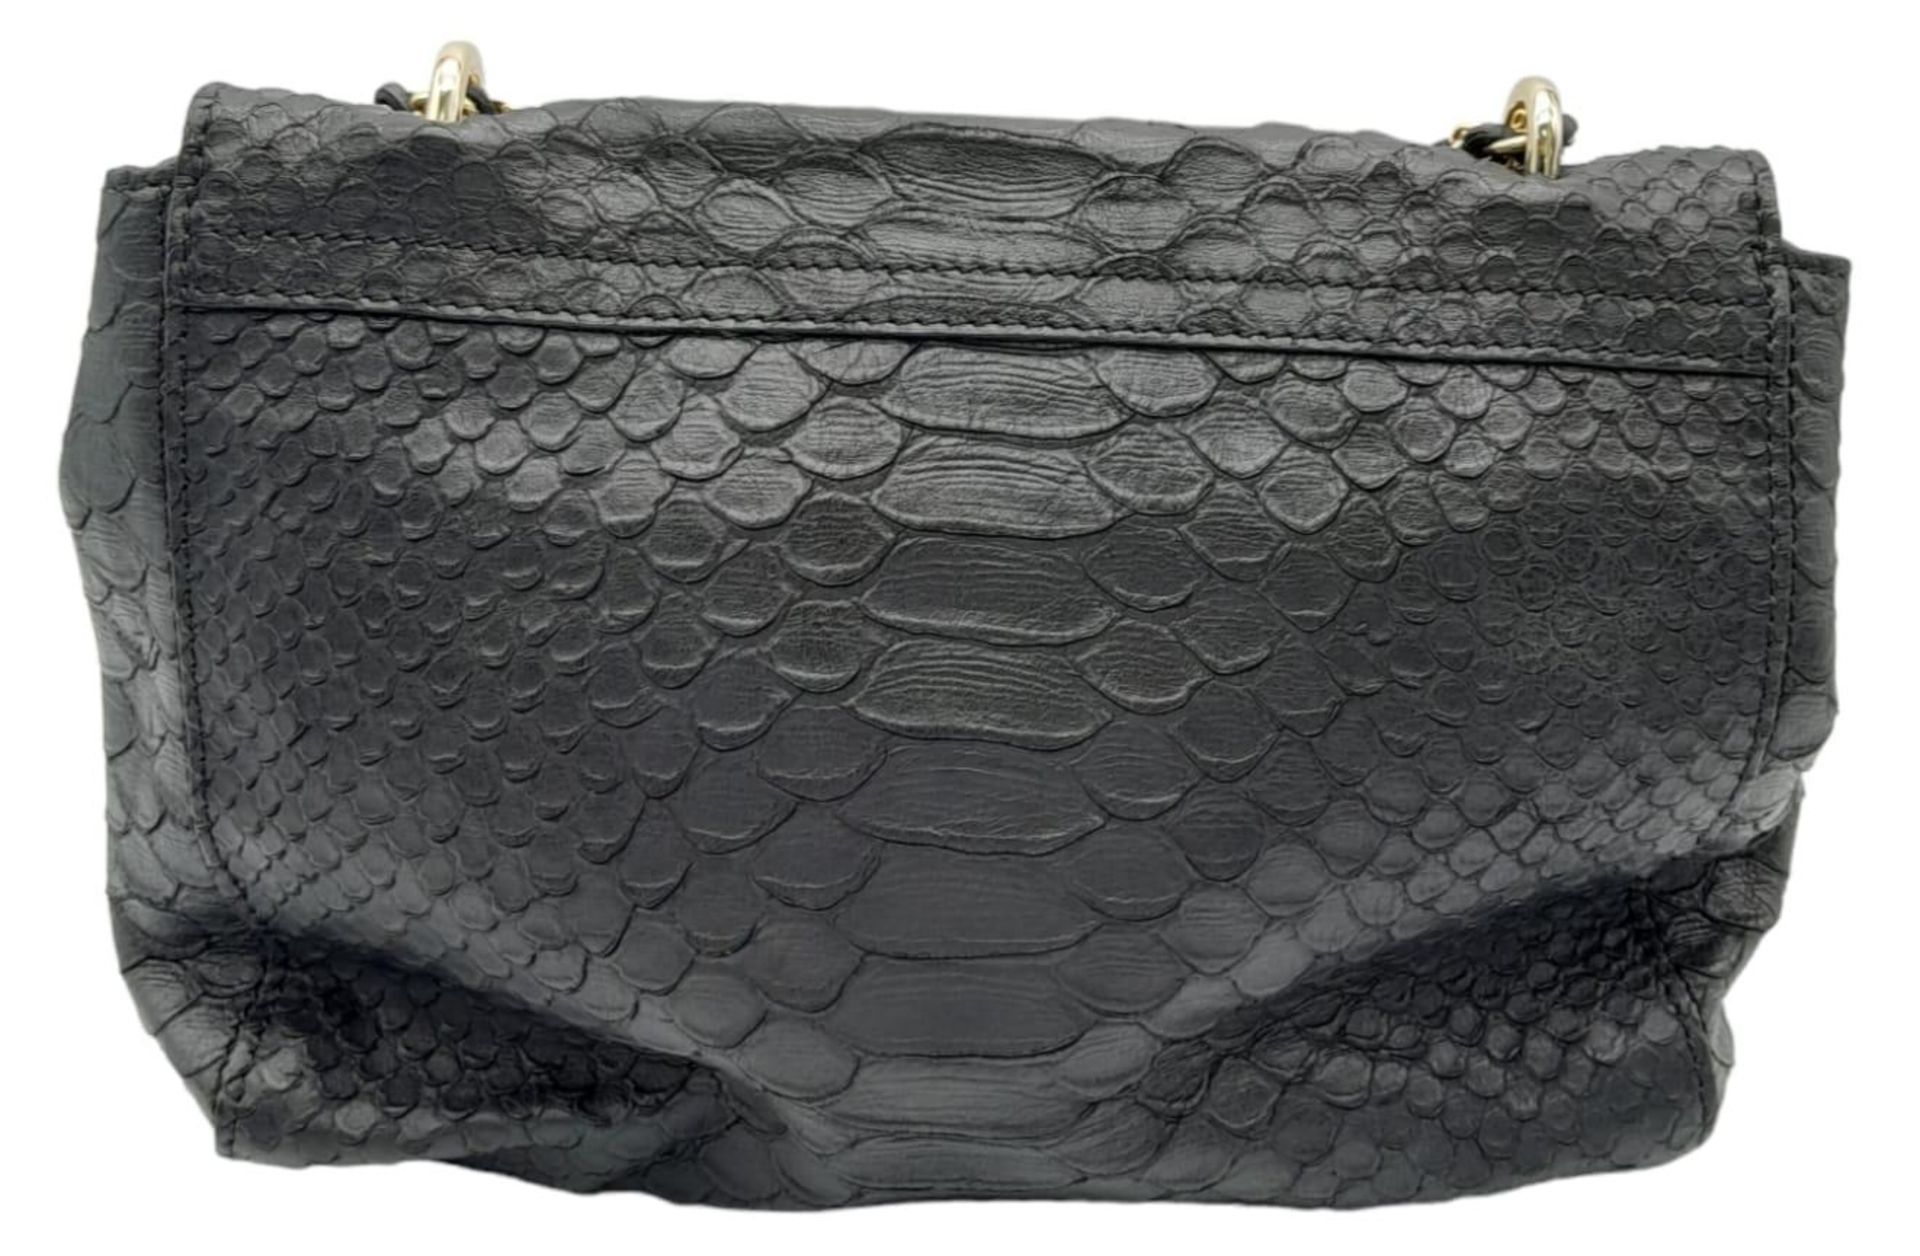 A Mulberry Black Cecily Shoulder Bag. Snakeskin exterior with gold-toned hardware, chain and leather - Image 4 of 8